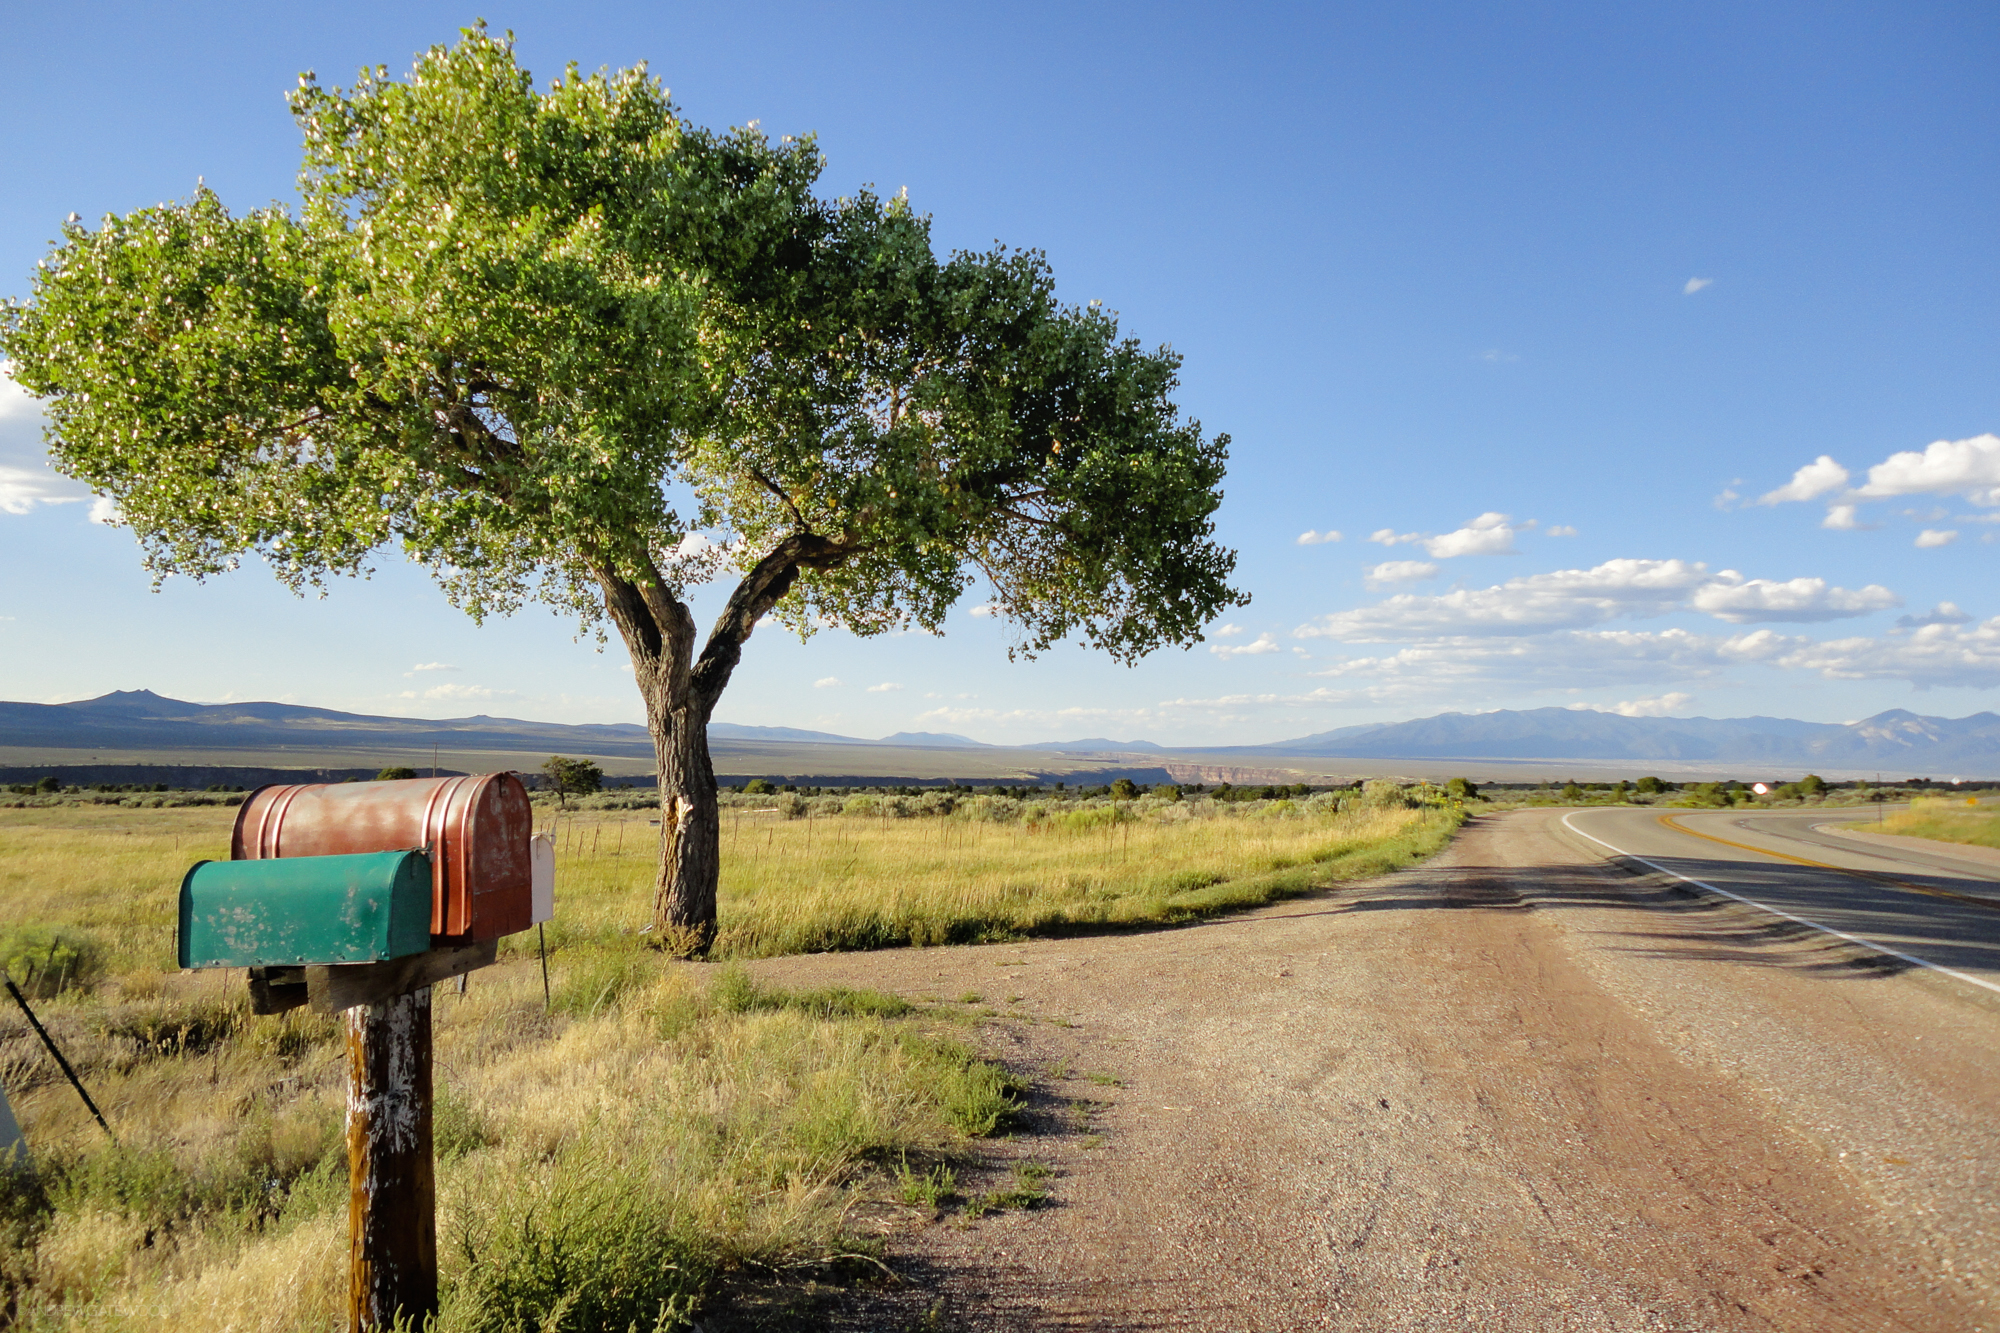 ©AndrewGatewood, Taos, New Mexico, Taos Tree, roadside, highway, tree, mailbox, summer, photography, mountains, canyon, gorge, Taos Gorge, Andrew Gatewood